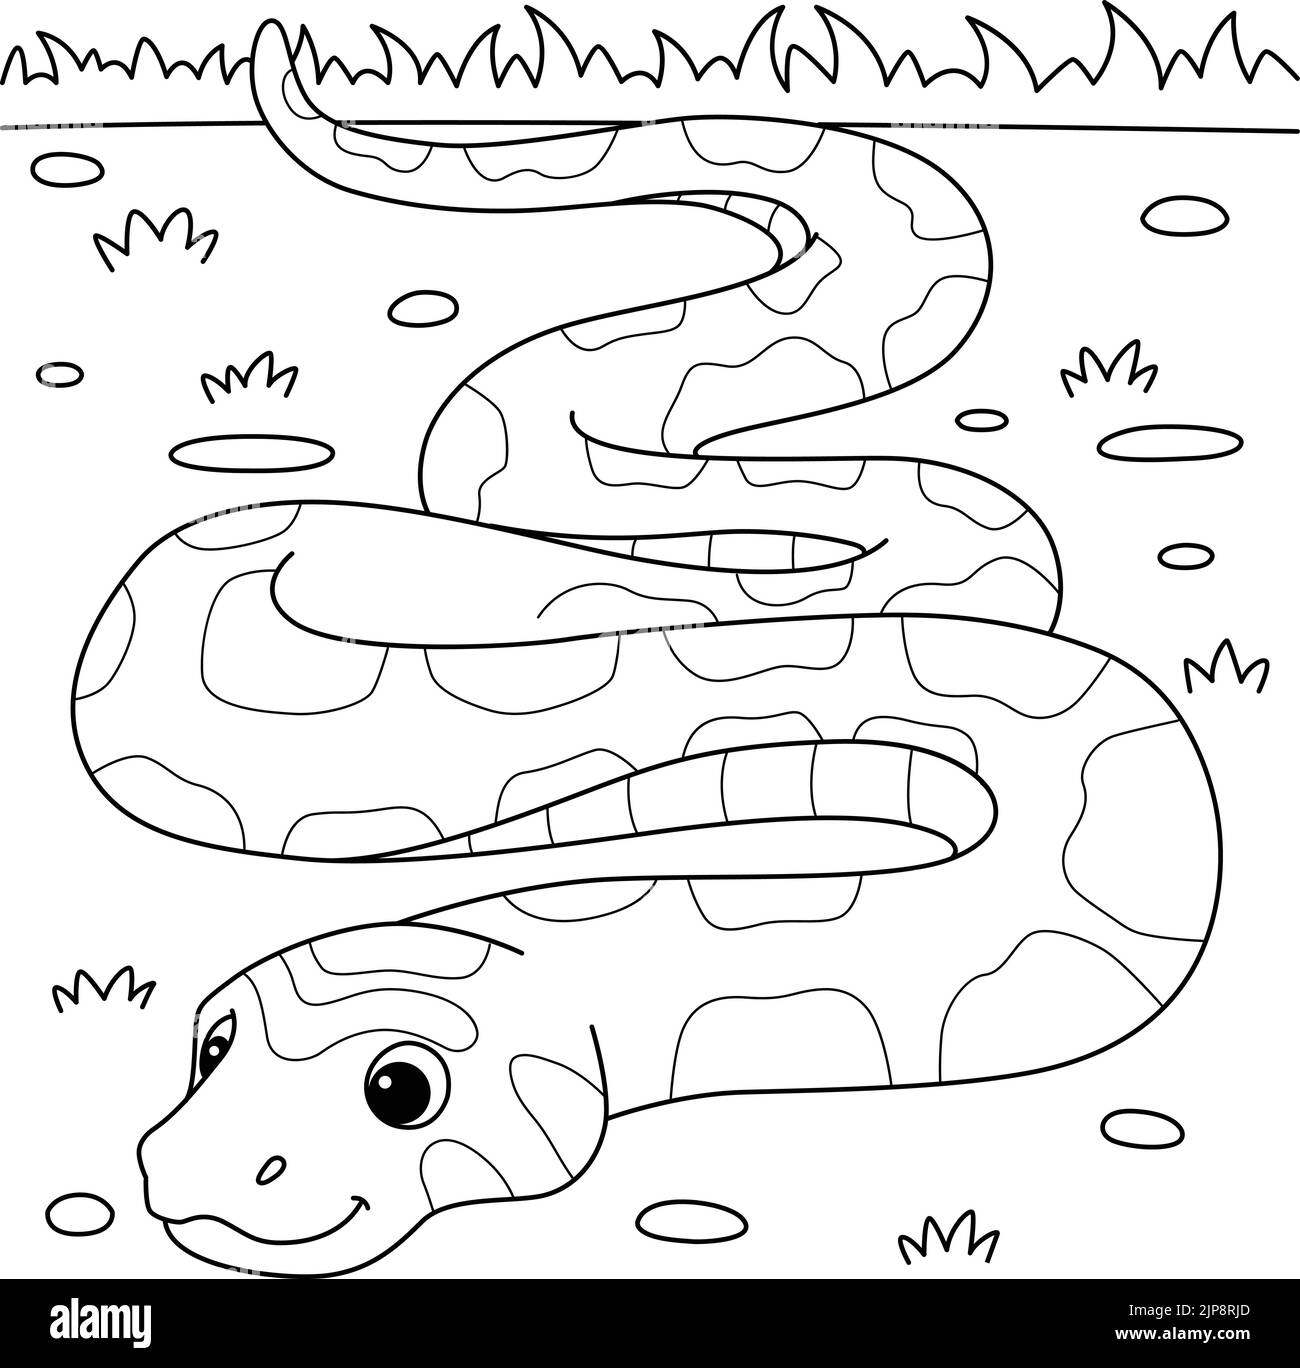 Corn Snake Animal Coloring Page for Kids Stock Vector